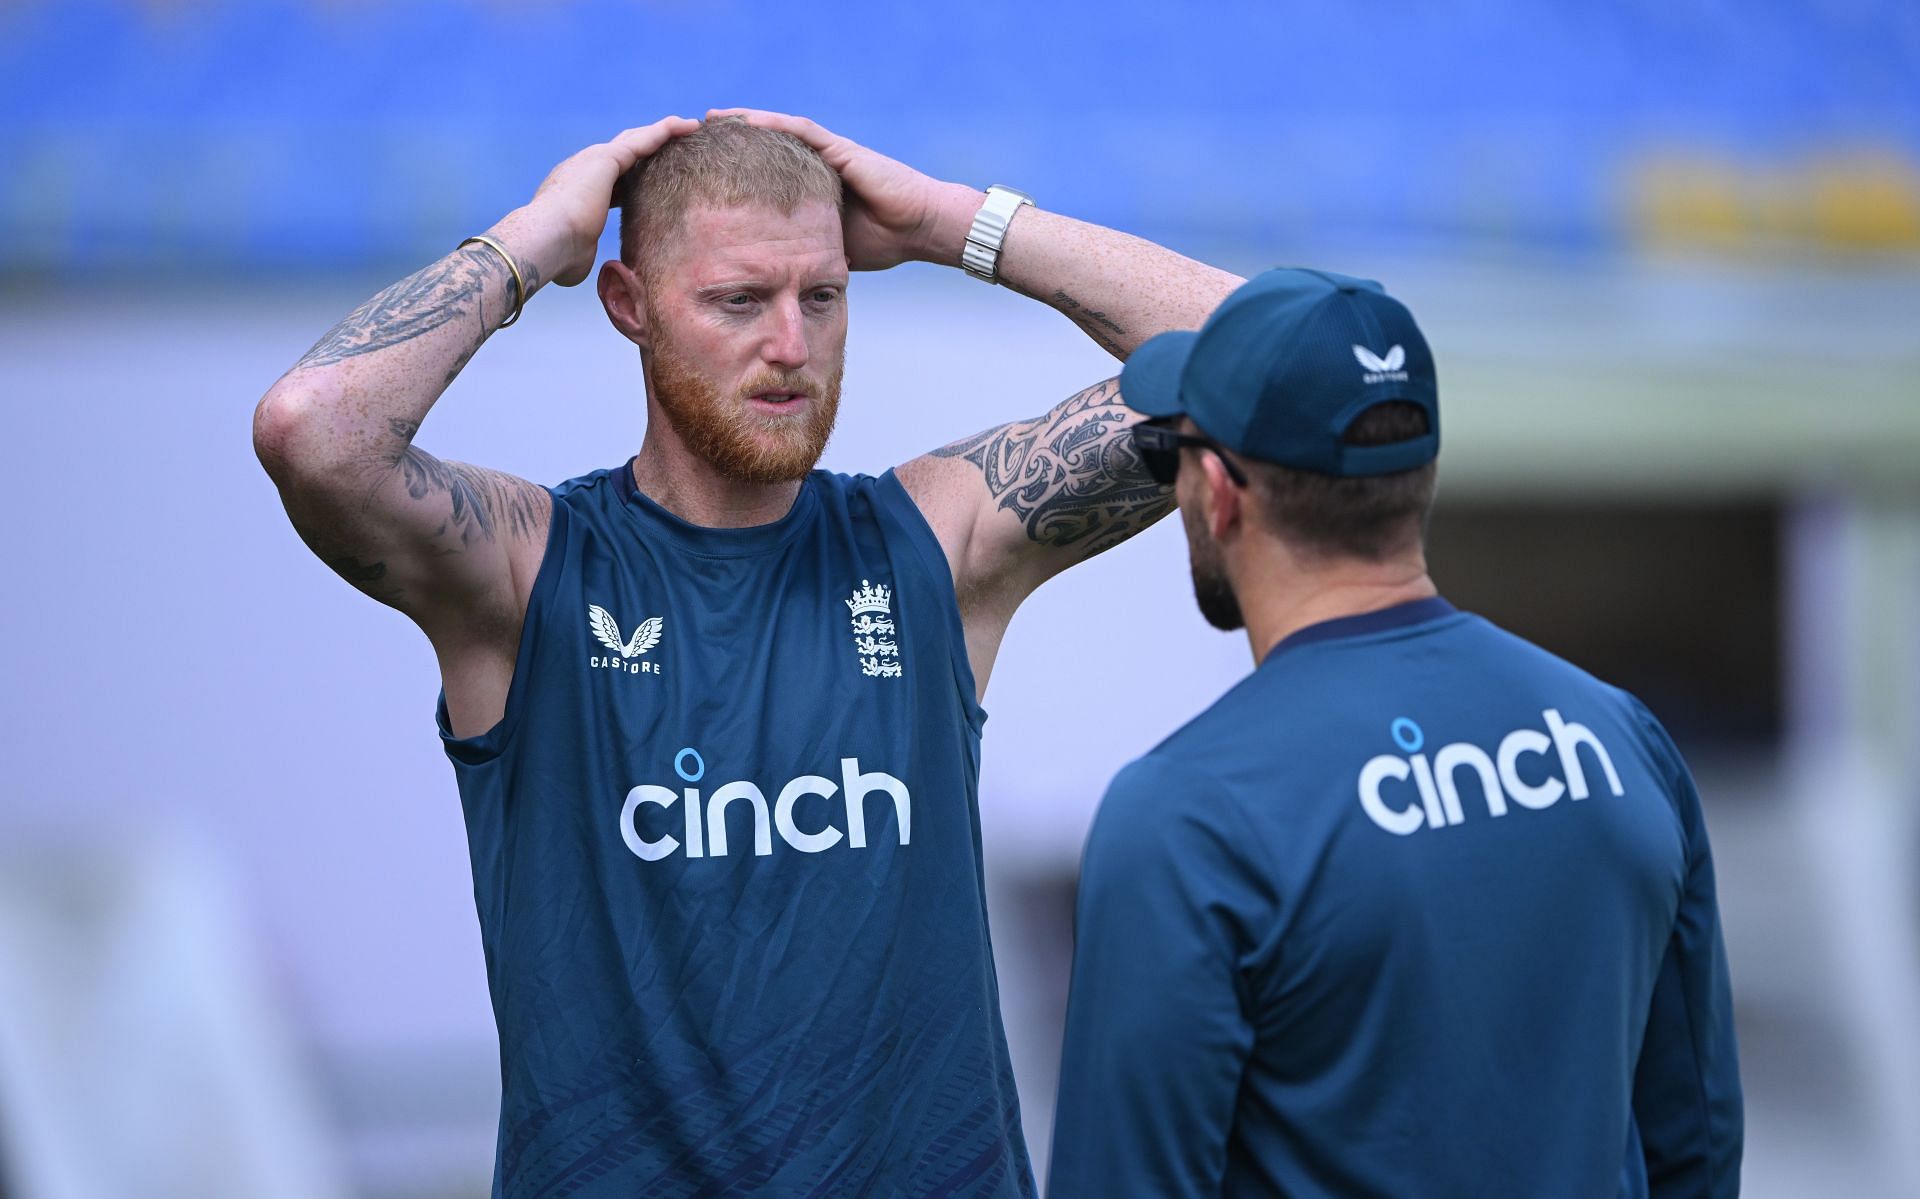 Ben Stokes and Brendon McCullum. (Image Credits: Getty)